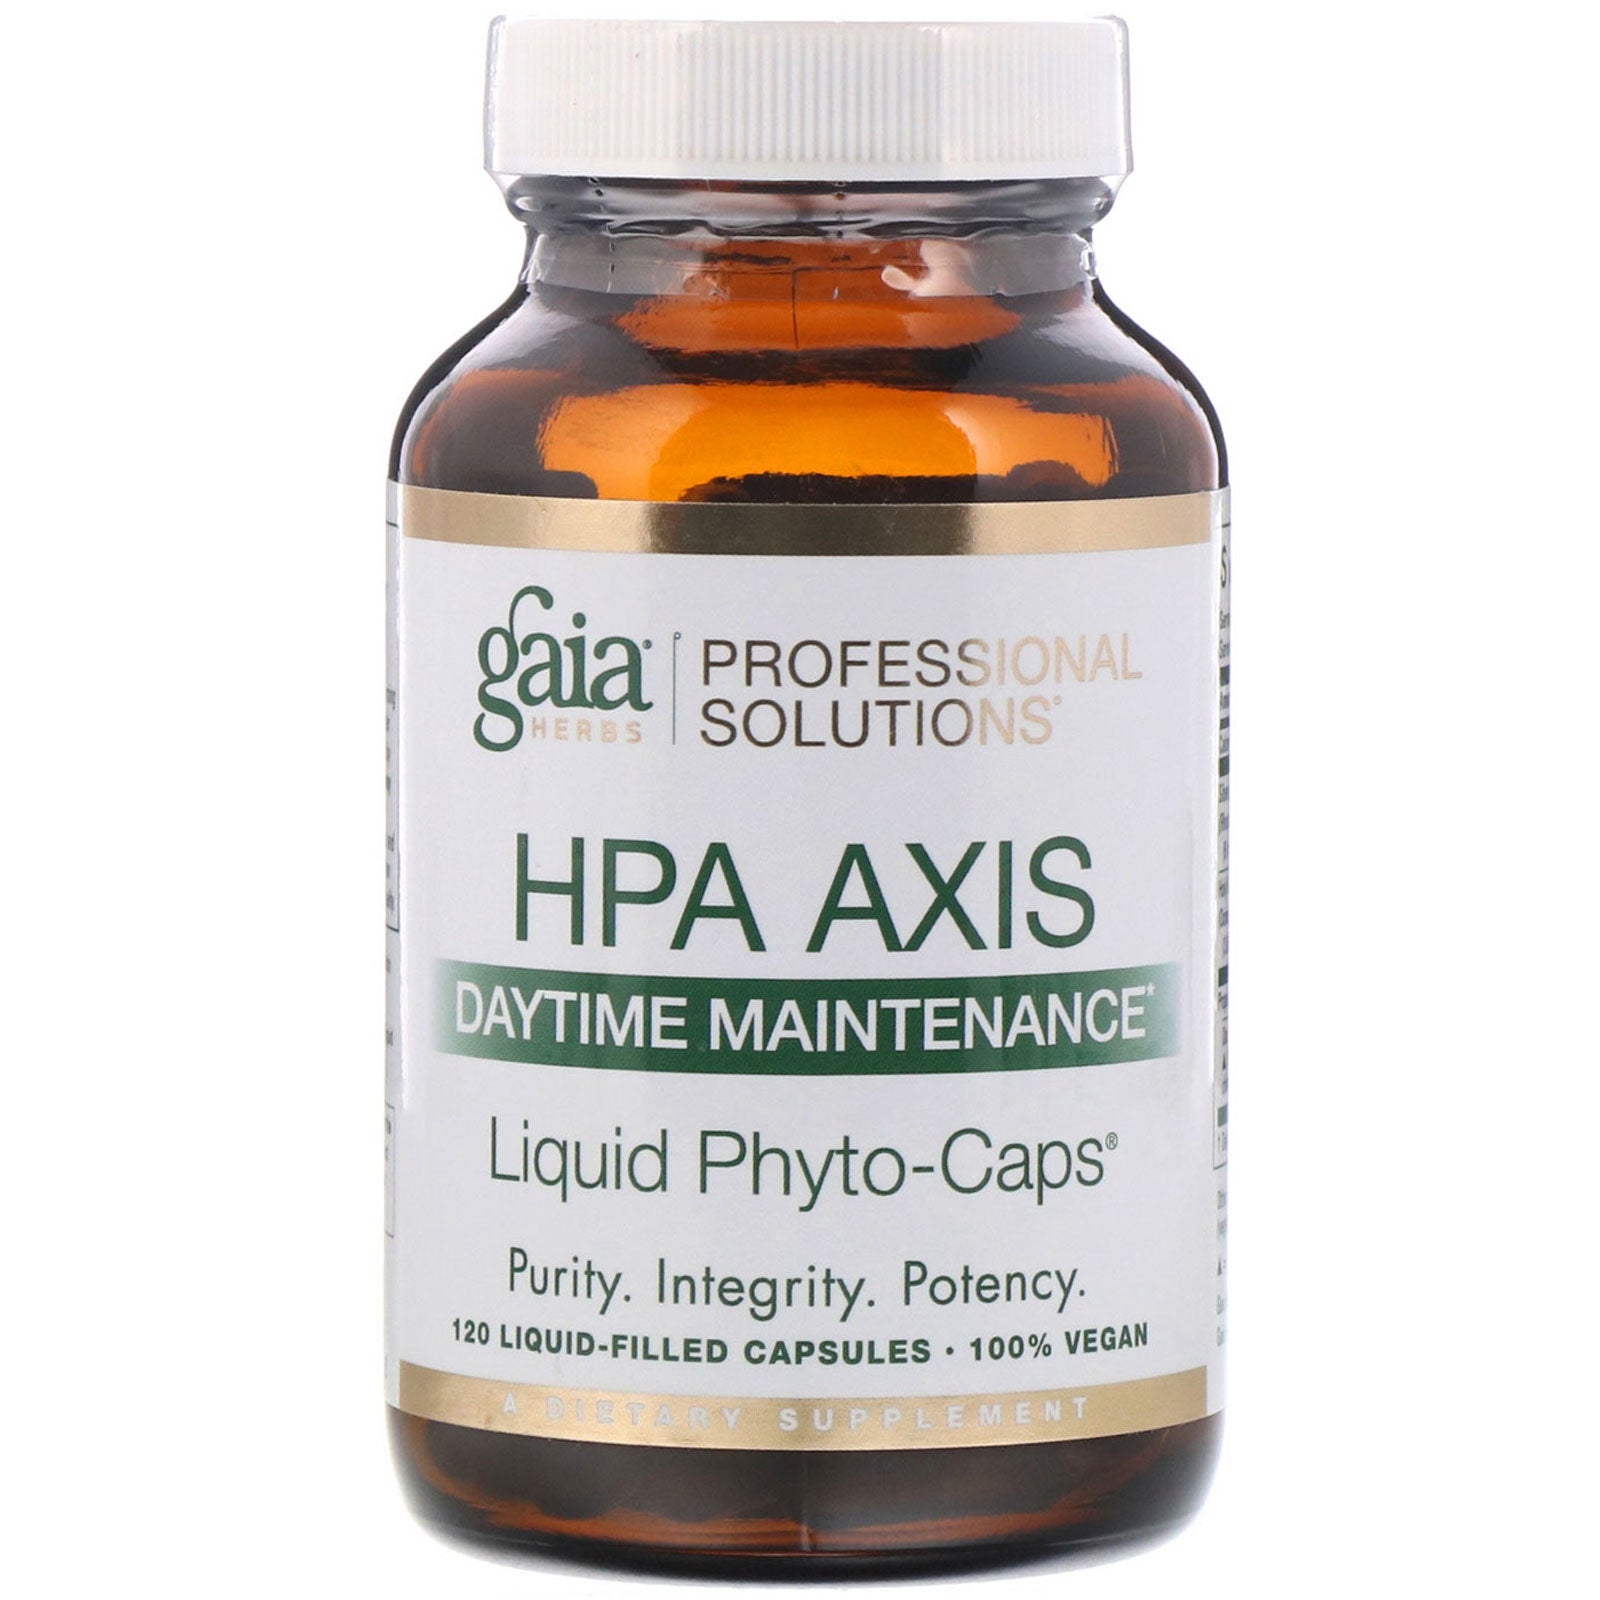 Gaia Herbs Professional Solutions, HPA Axis, Daytime Maintenance